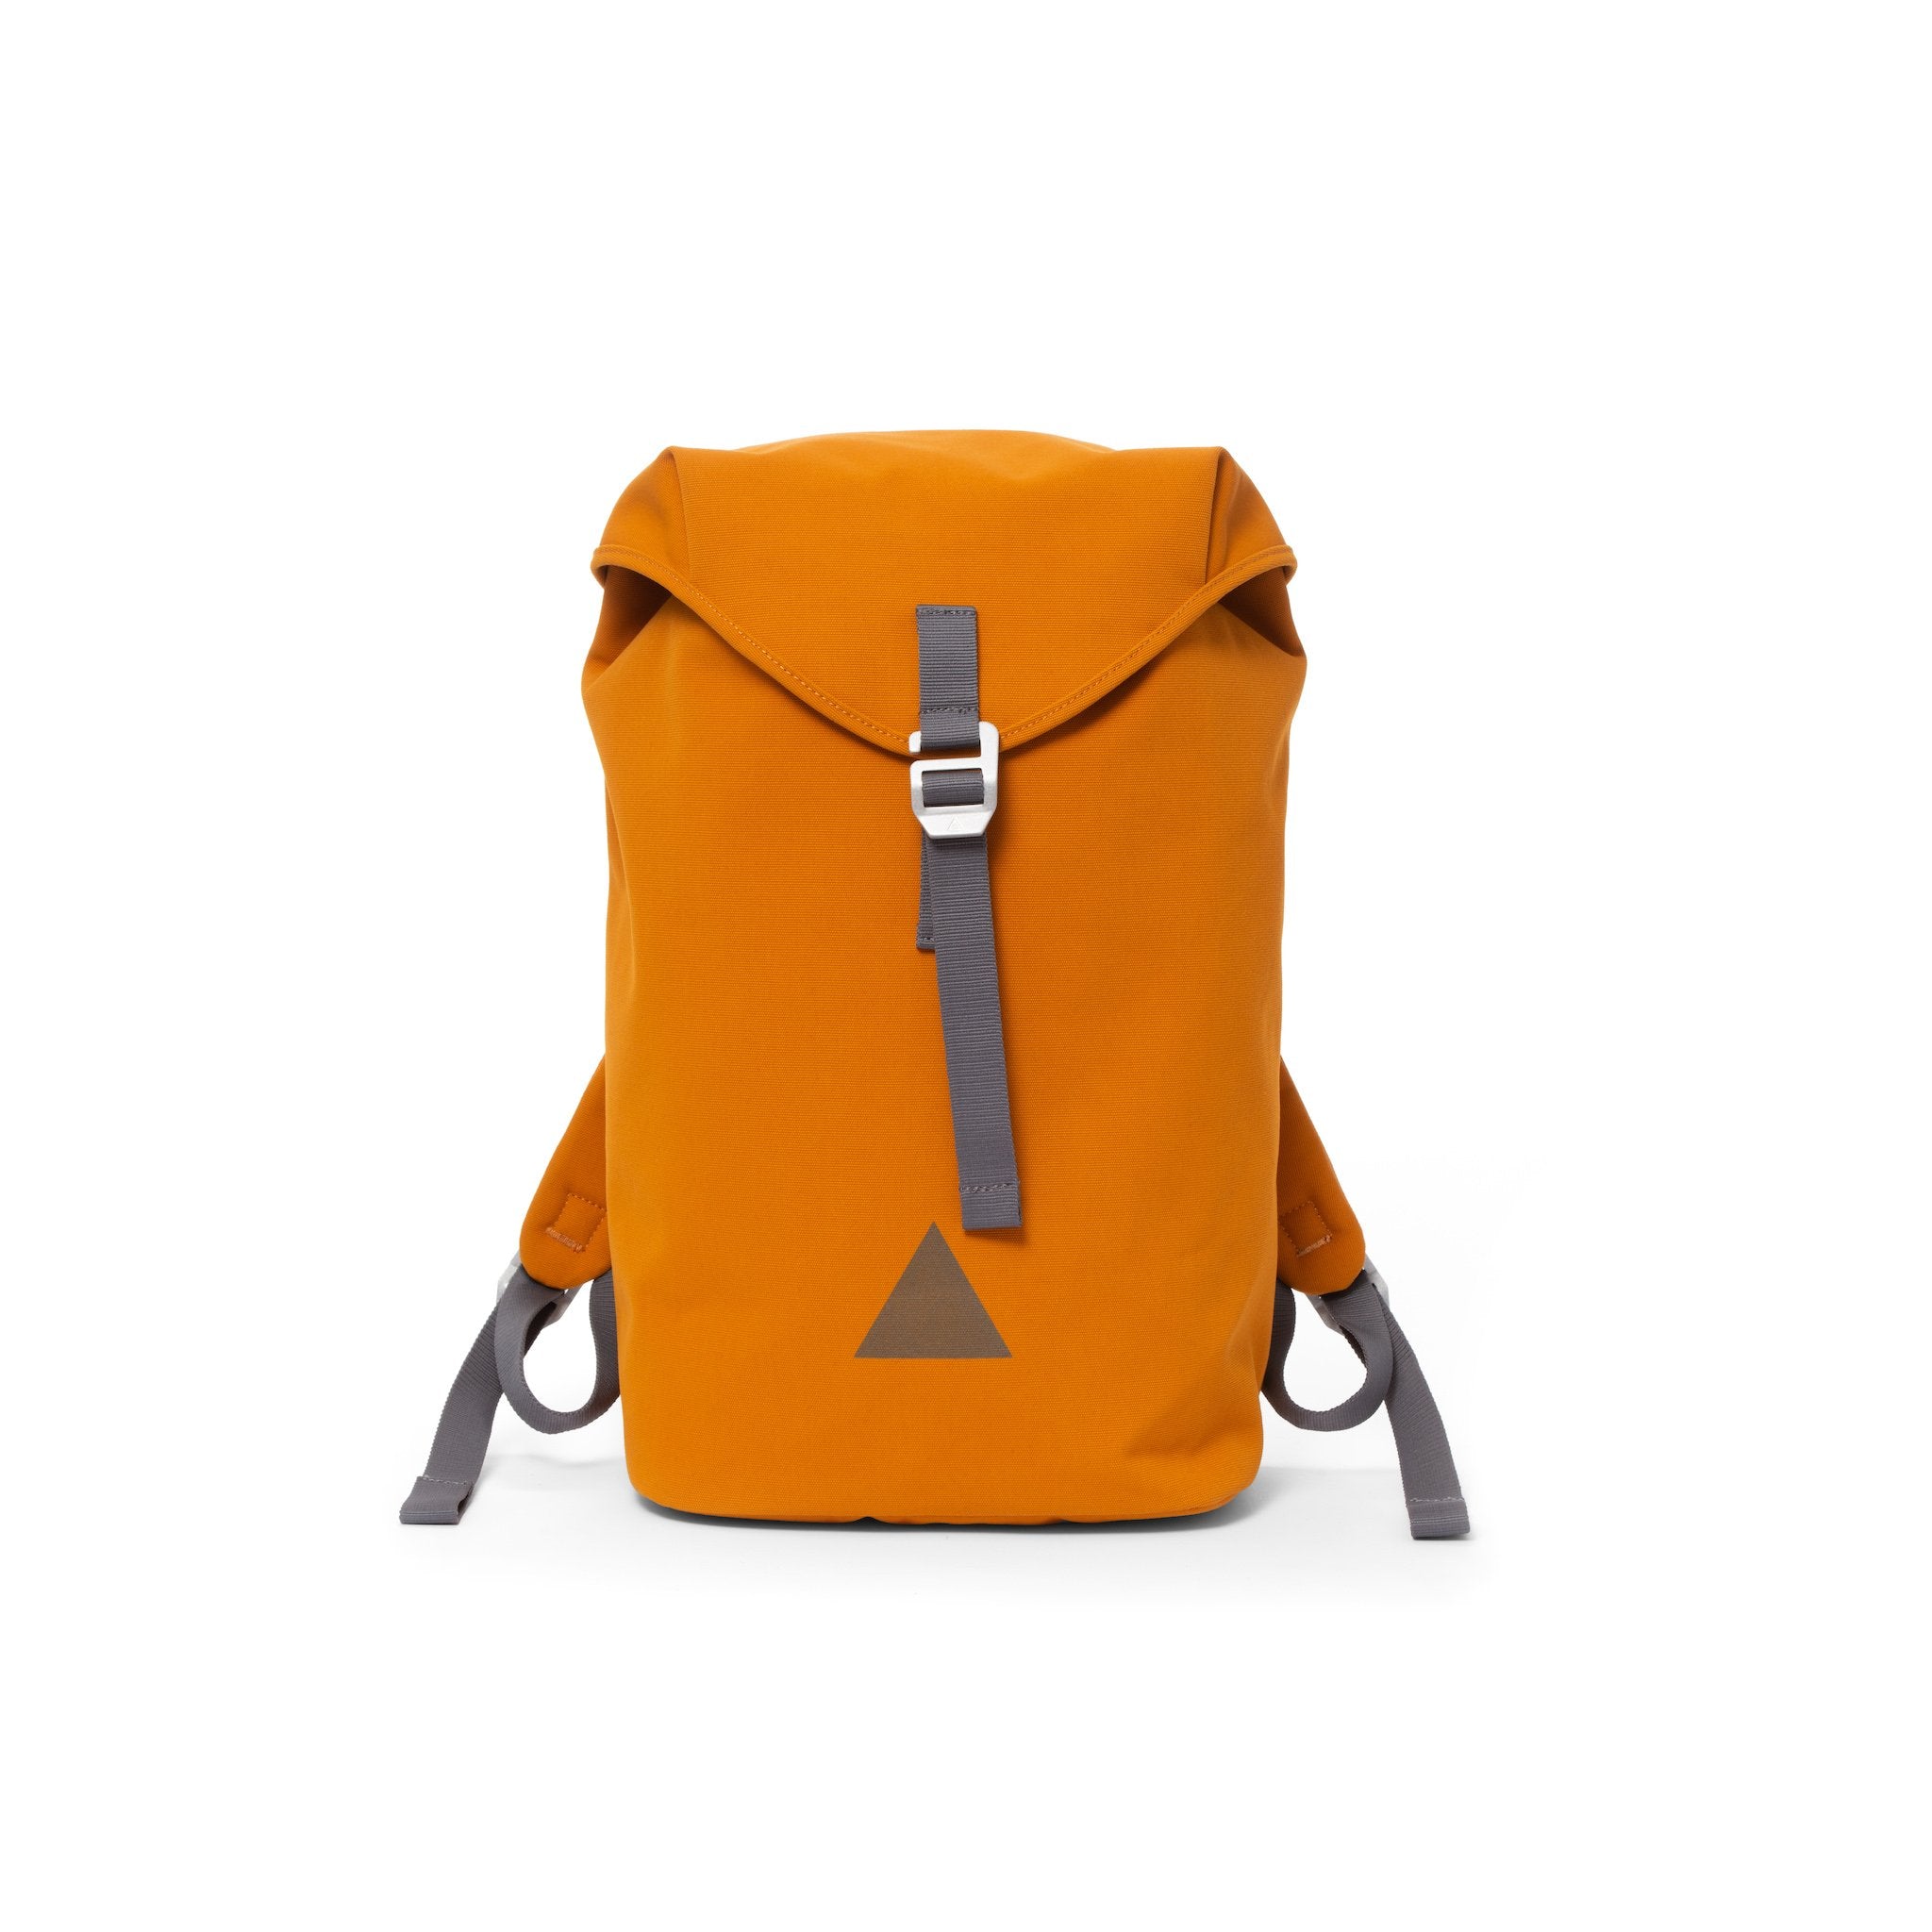 Orange canvas backpack with a flap closure and triangle logo.